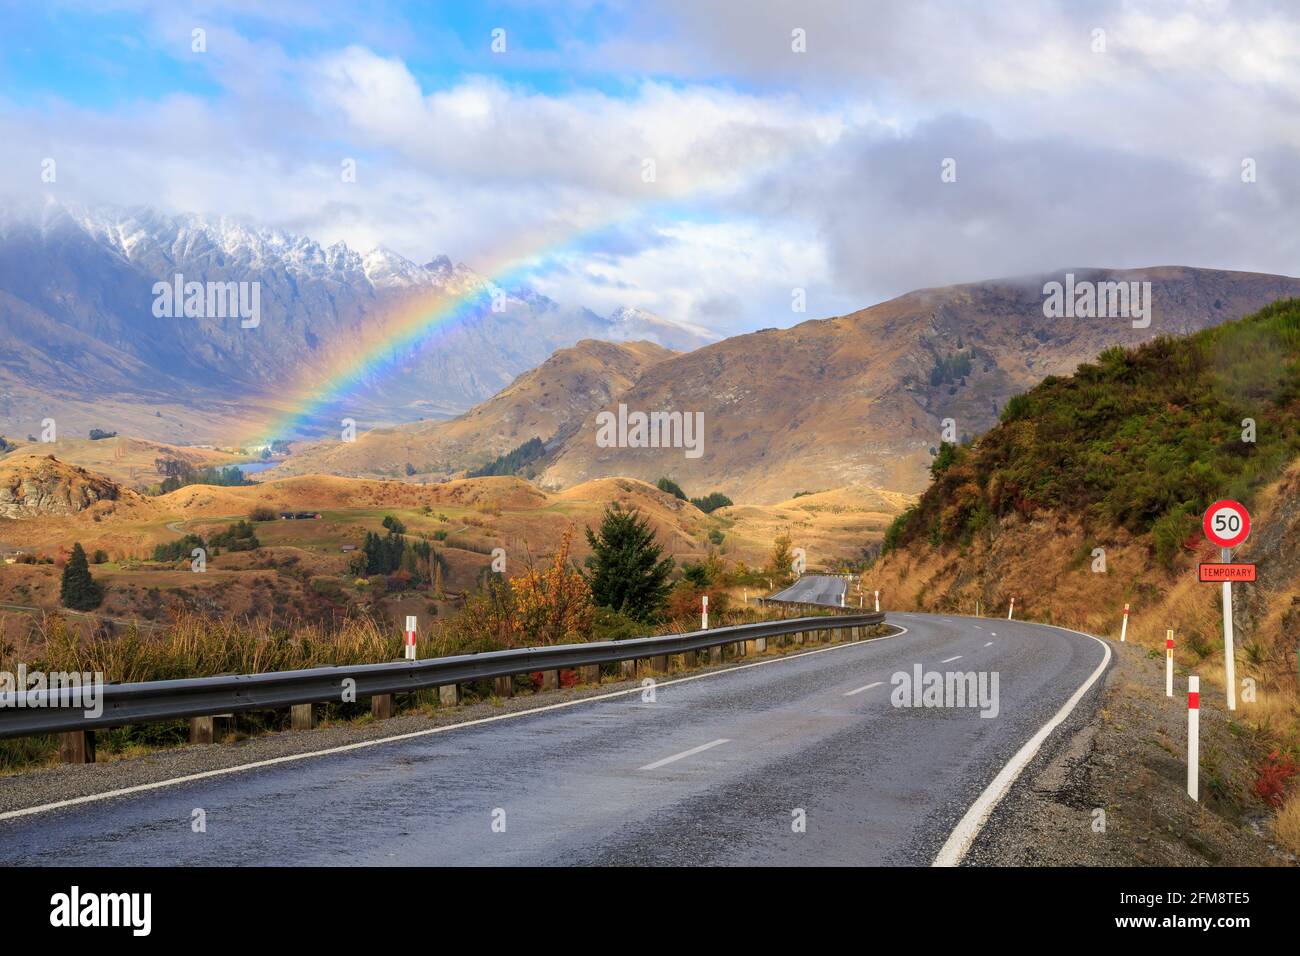 A rainbow in the valley between The Remarkables mountain range and Coronet Peak in New Zealand's South Island Stock Photo